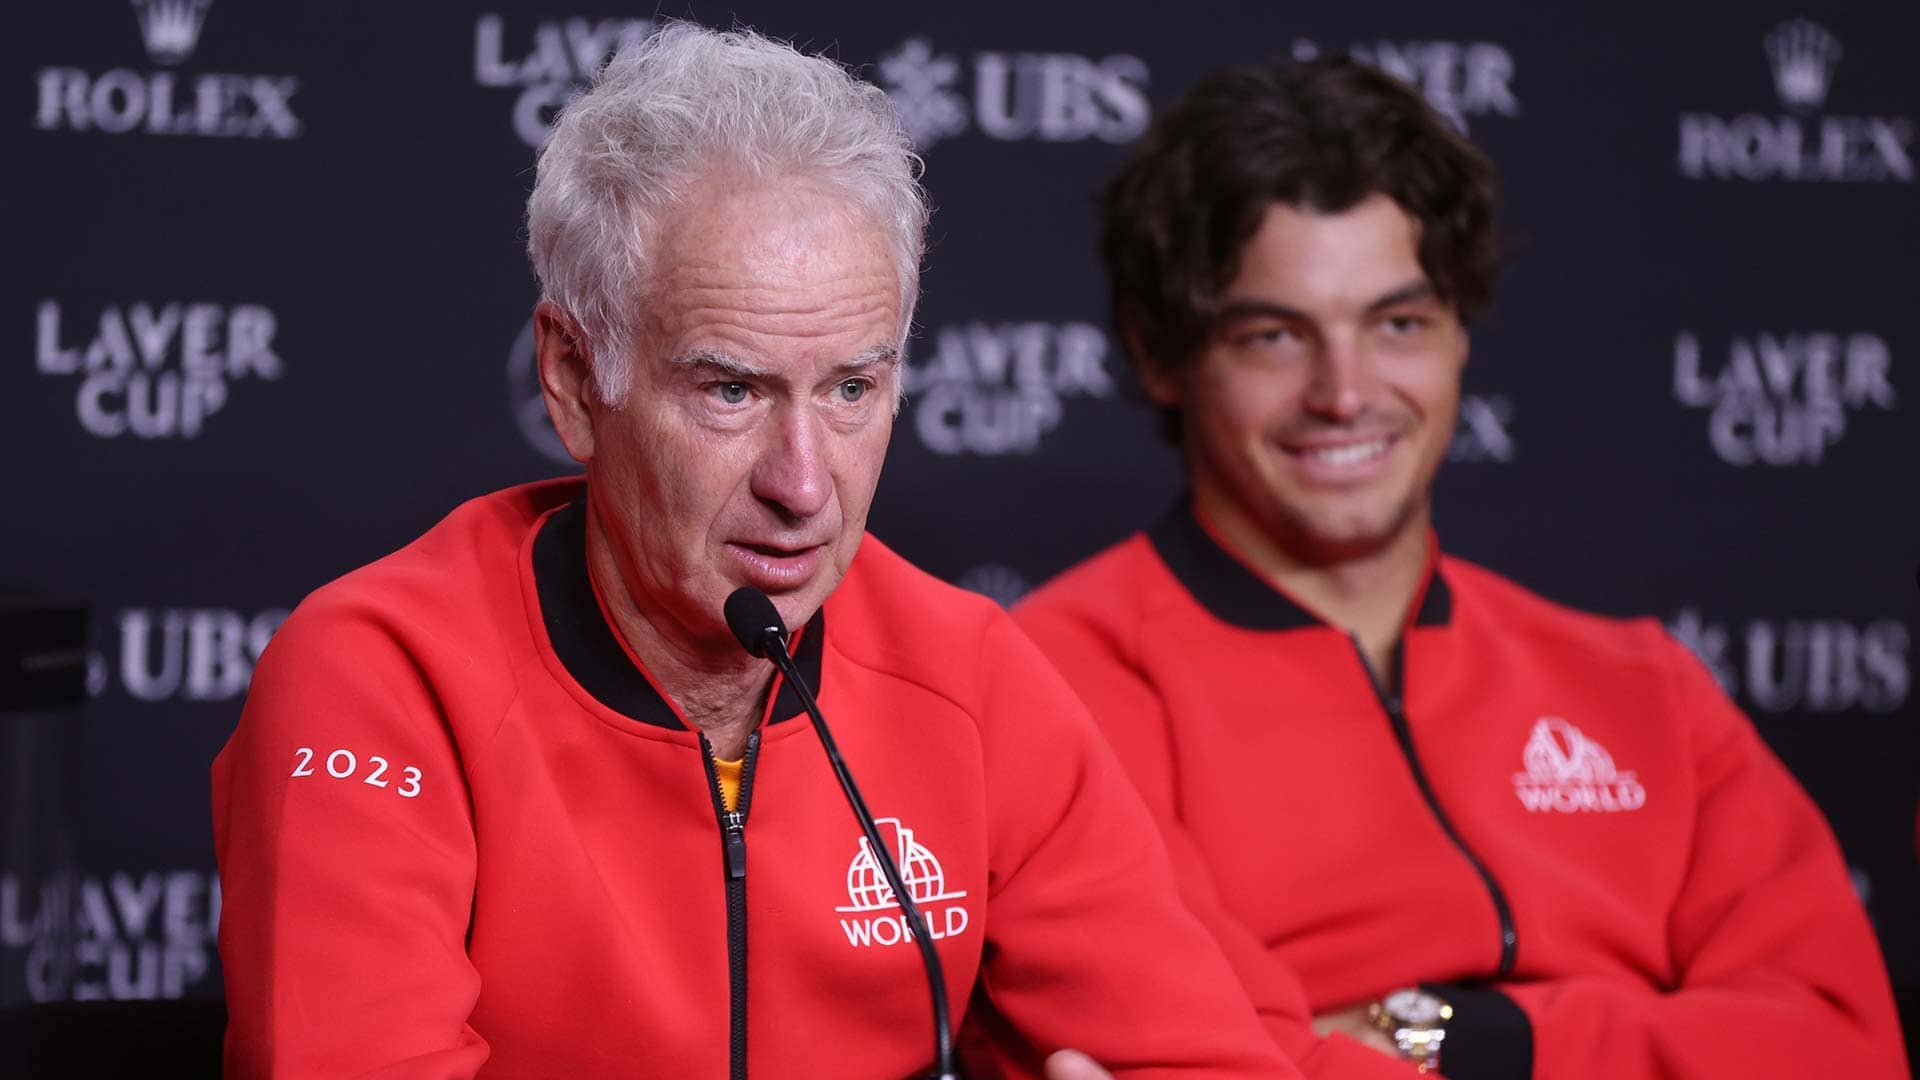 John McEnroe will lead Team World for the sixth time at the Laver Cup.